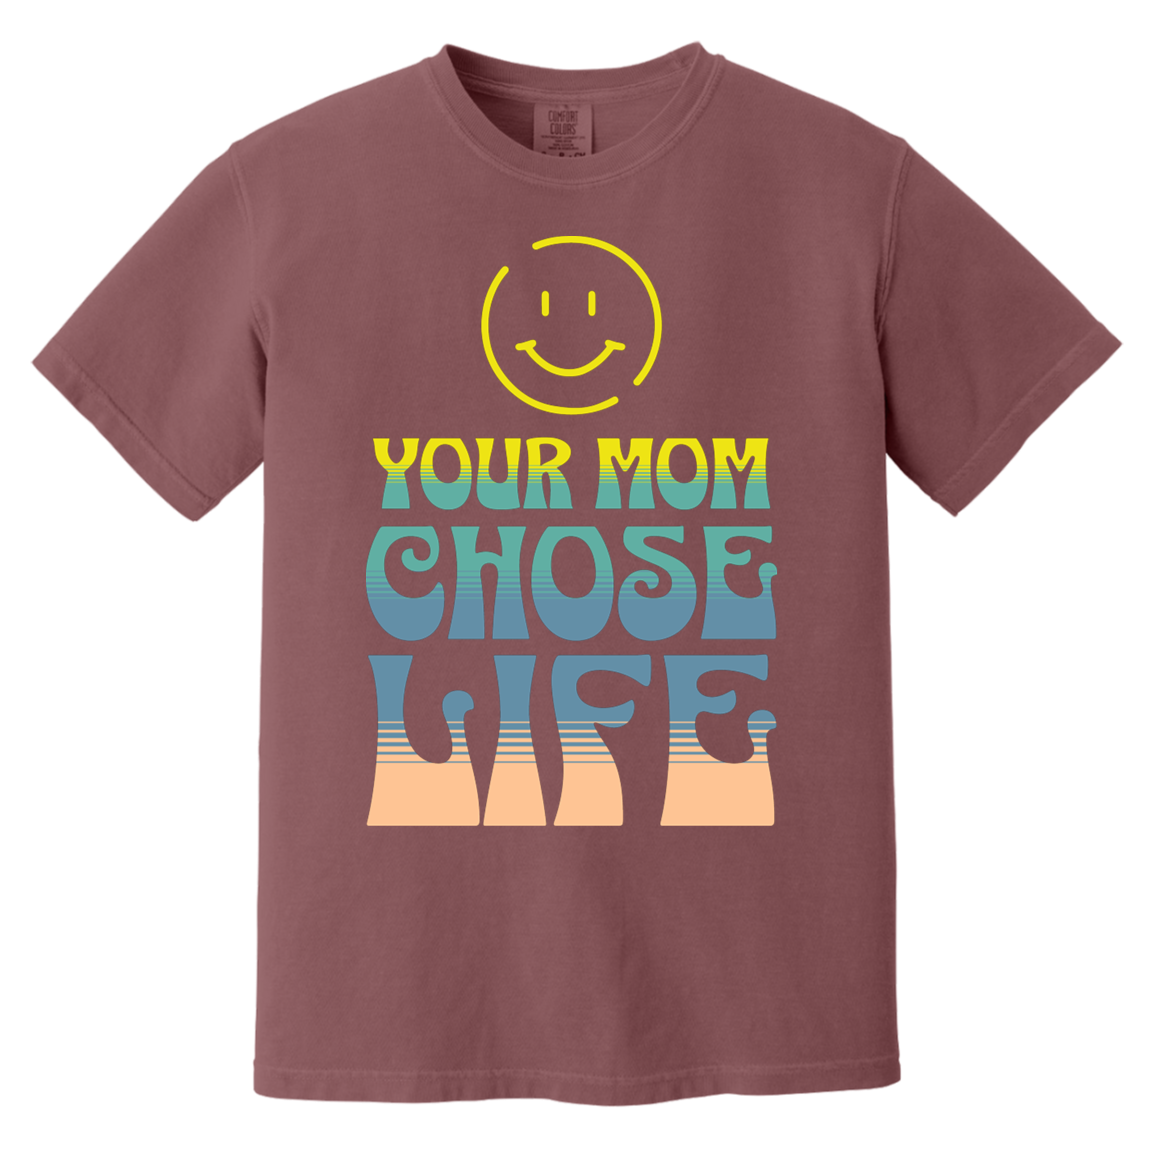 Prolife tshirt for prolifers, march for life, pro-life message your mom chose life-T-Shirts-PureDesignTees